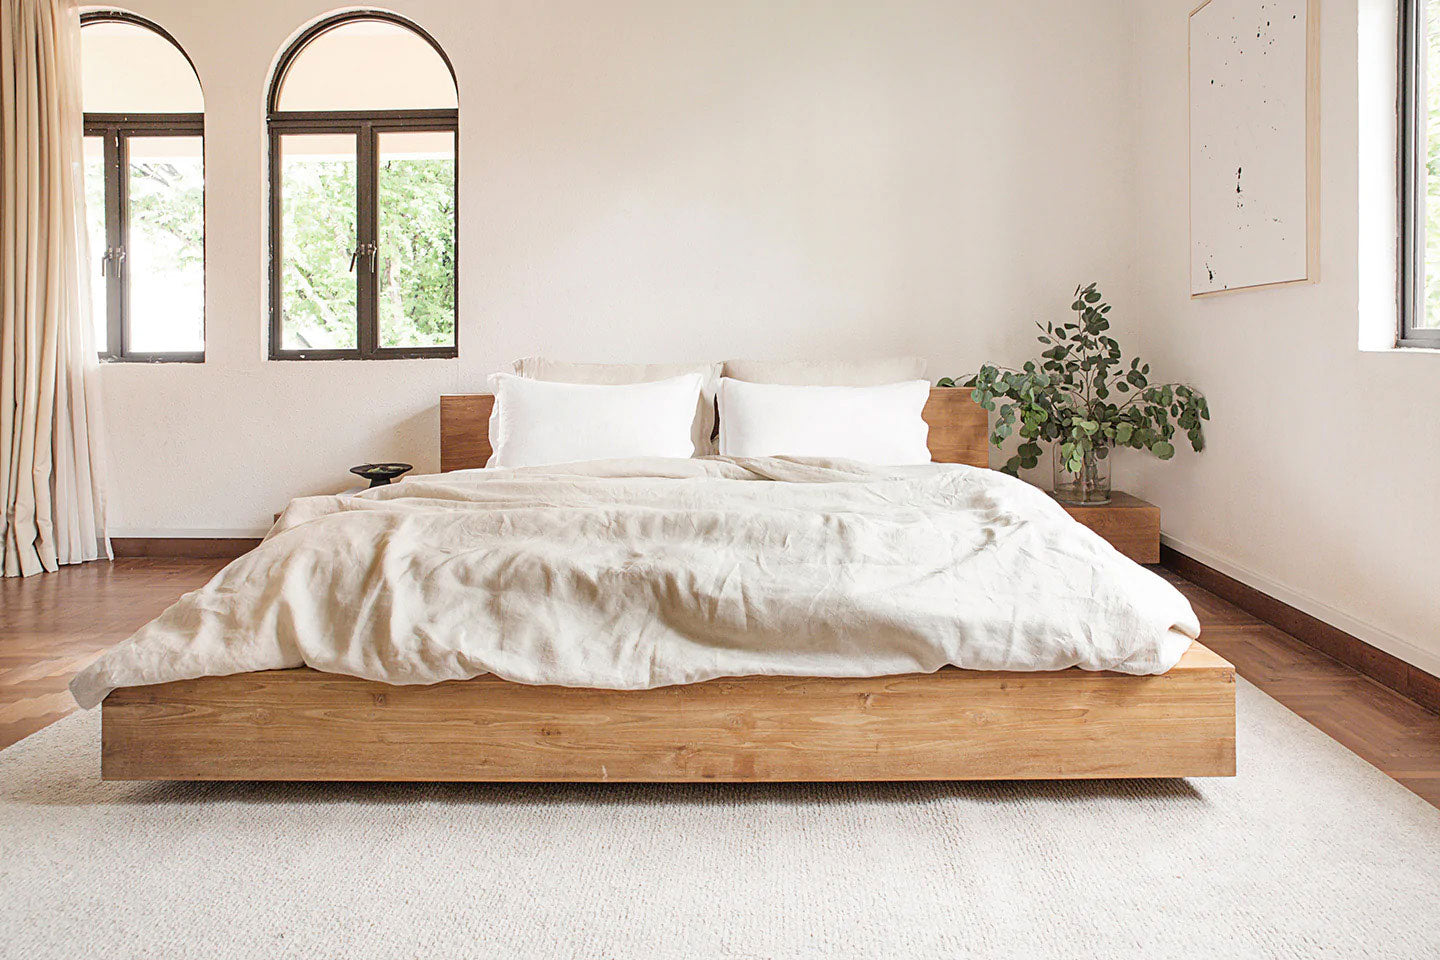 Custom Size Mattresses - Made To Measure For Any Size